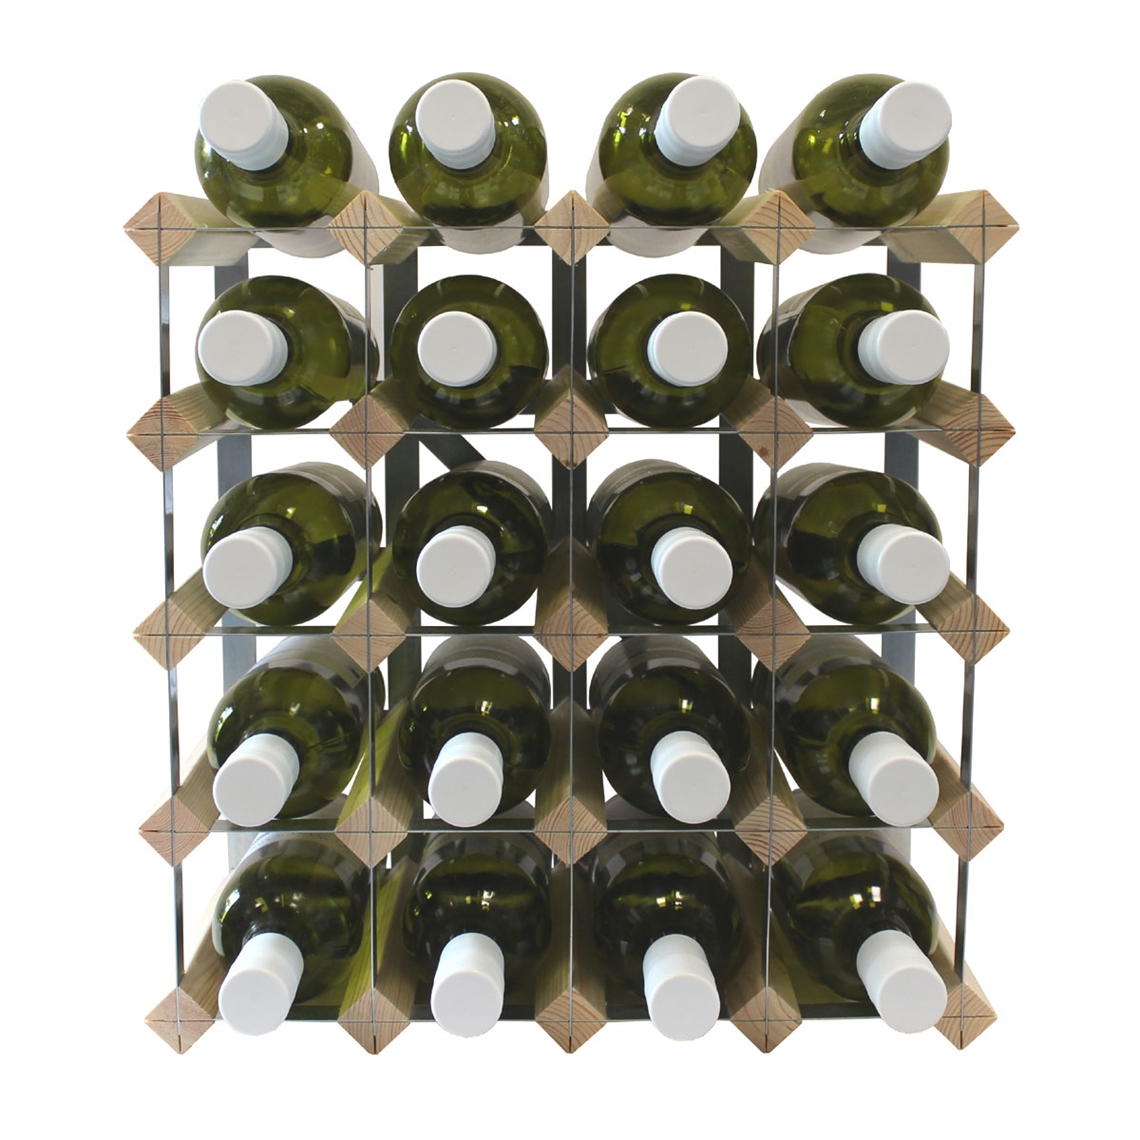 View more metal wine racks from our Assembled Wine Racks range